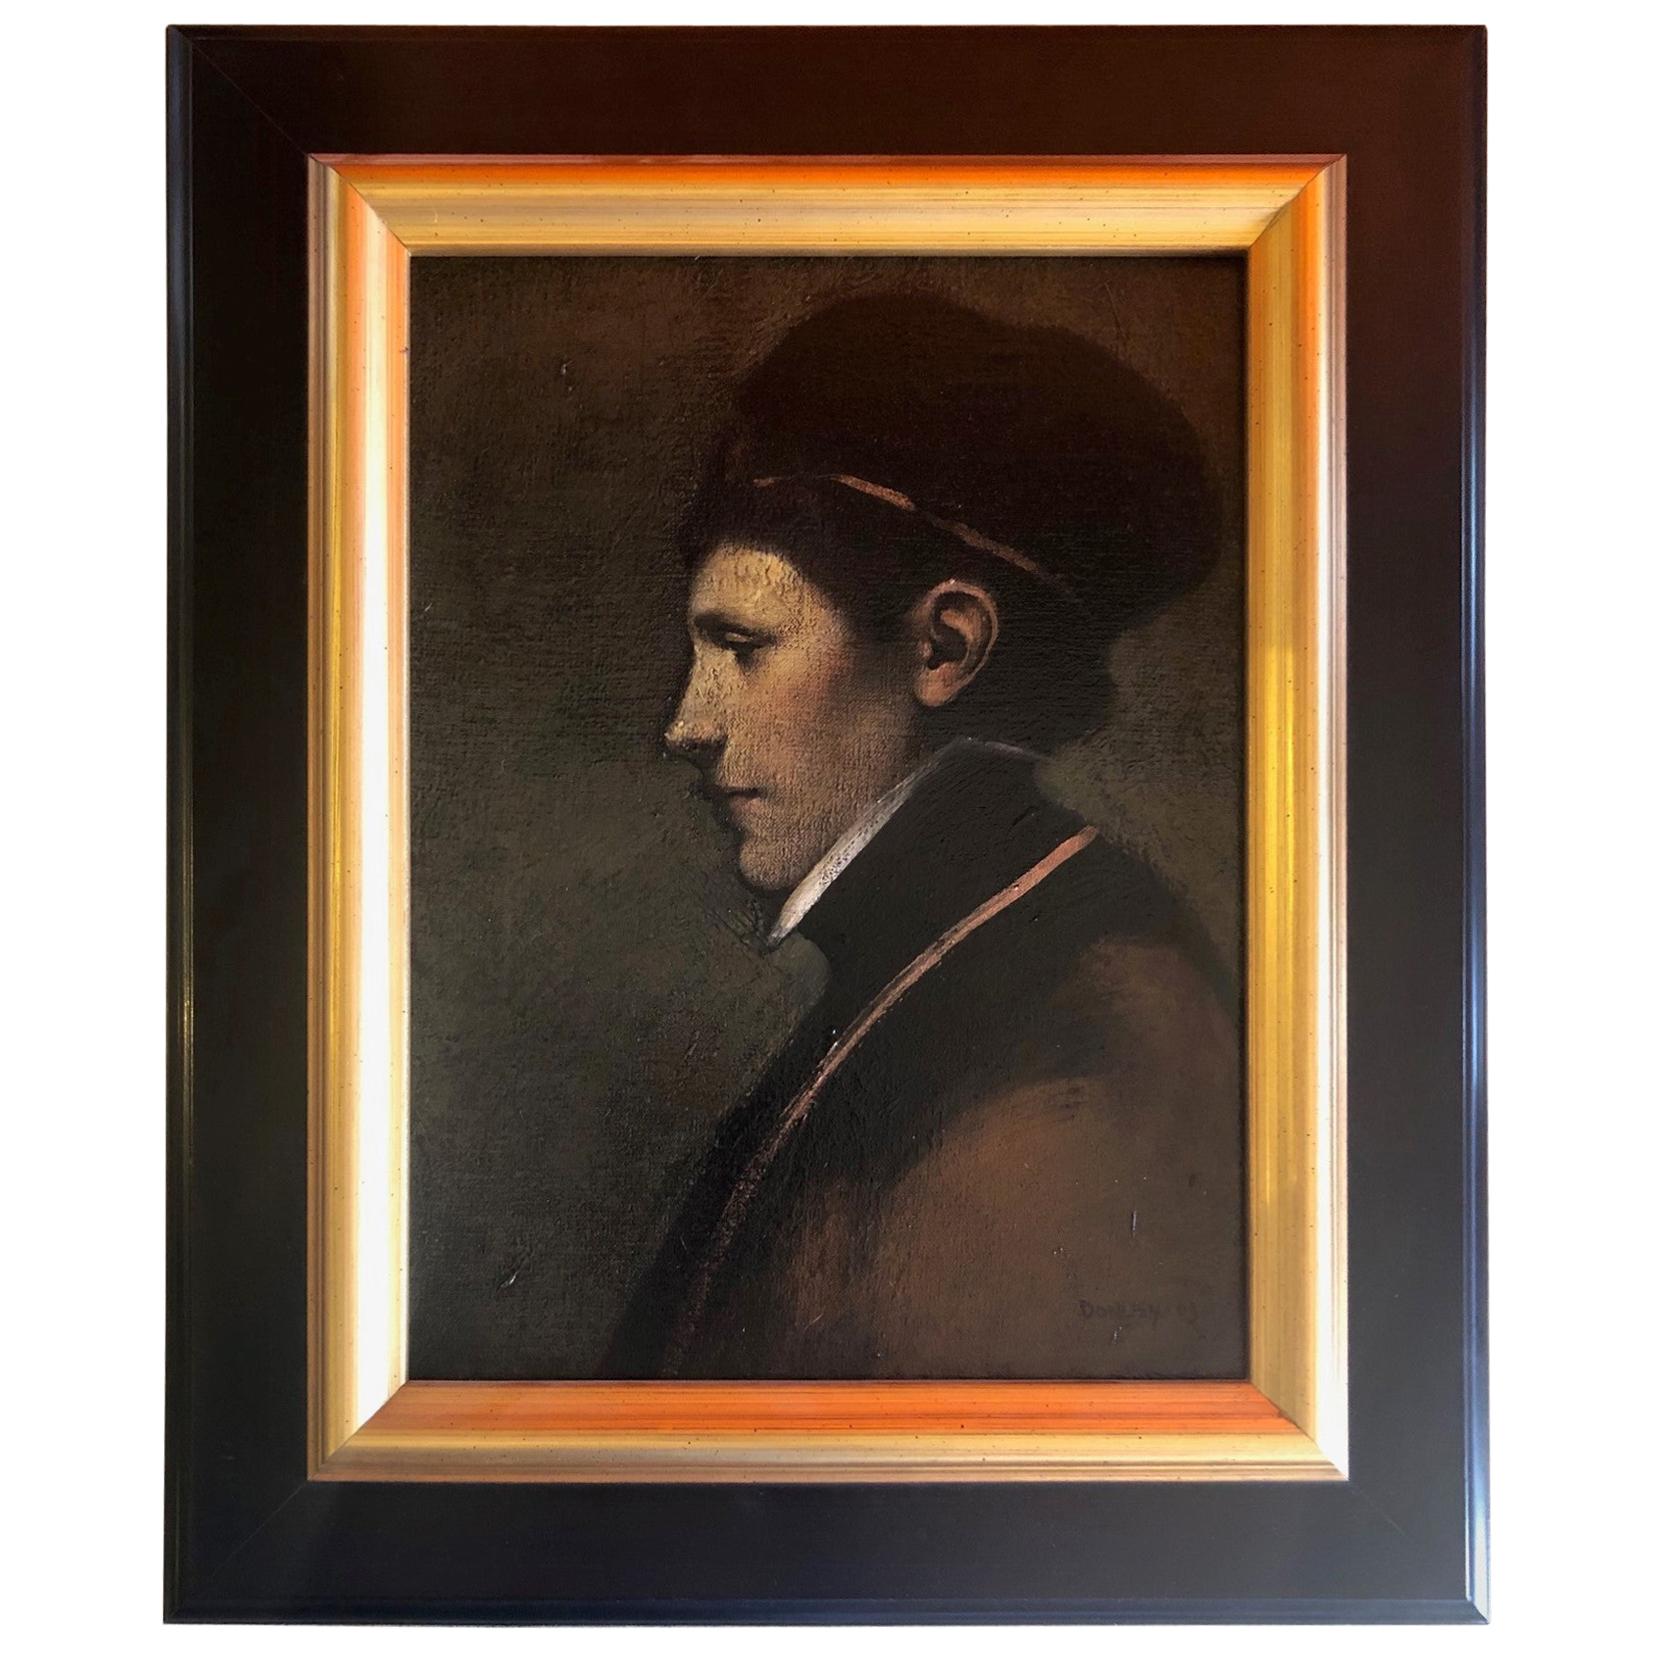 Baroque Style Oil Painting "Figure with Black Cap" by Ray Donley